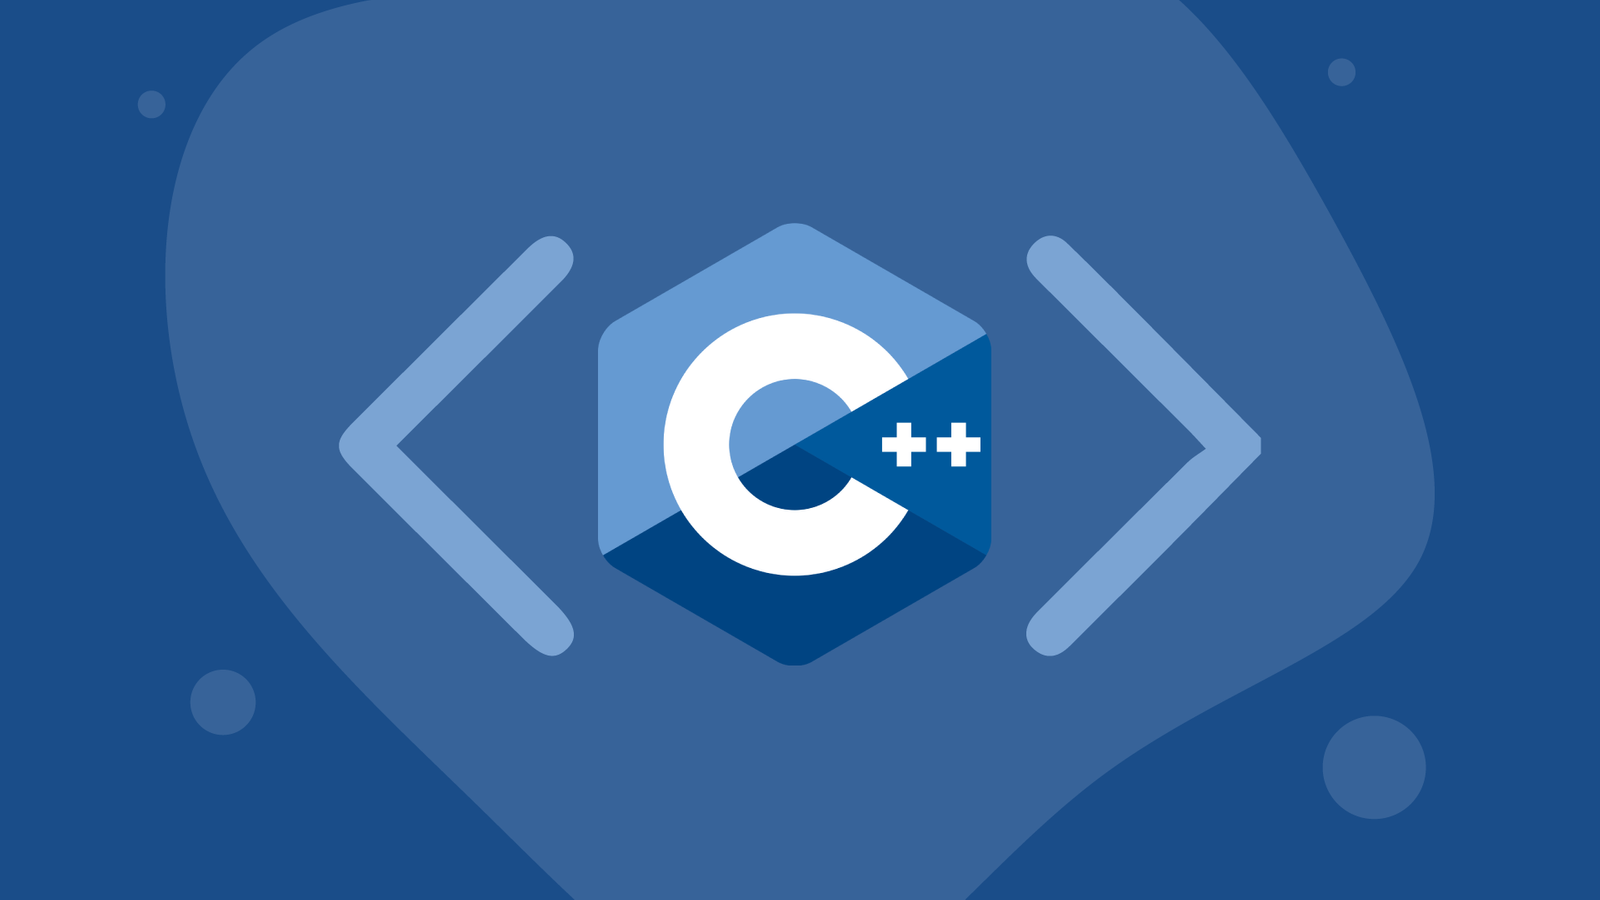 Using the system("pause") command in C++